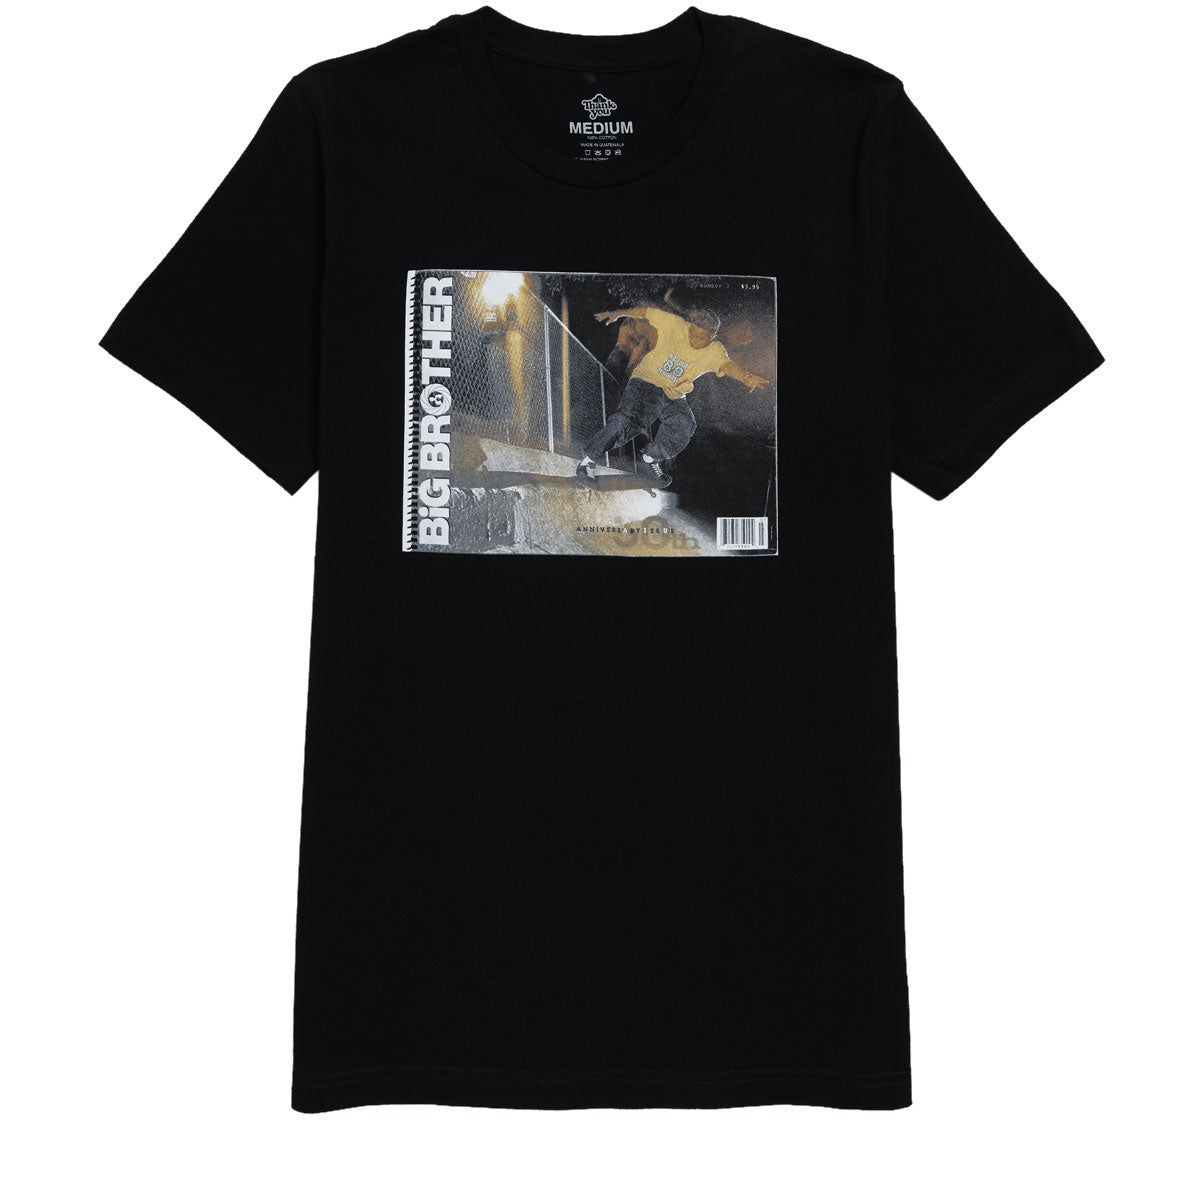 Thank You Anniversary Cover T-Shirt - Black image 1